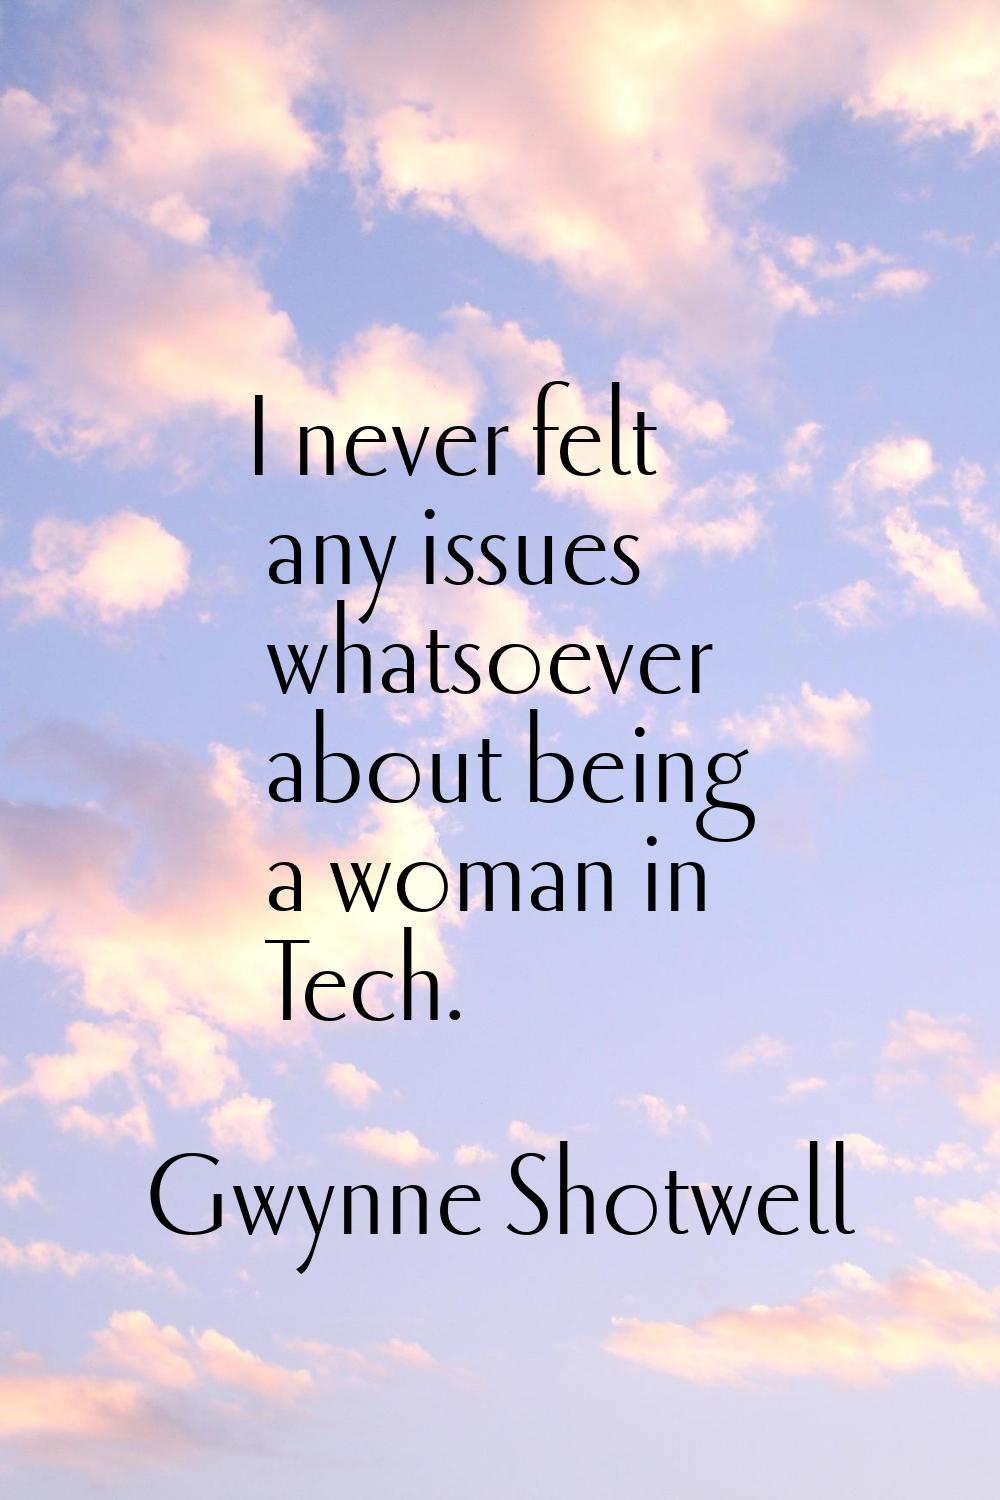 I never felt any issues whatsoever about being a woman in Tech.